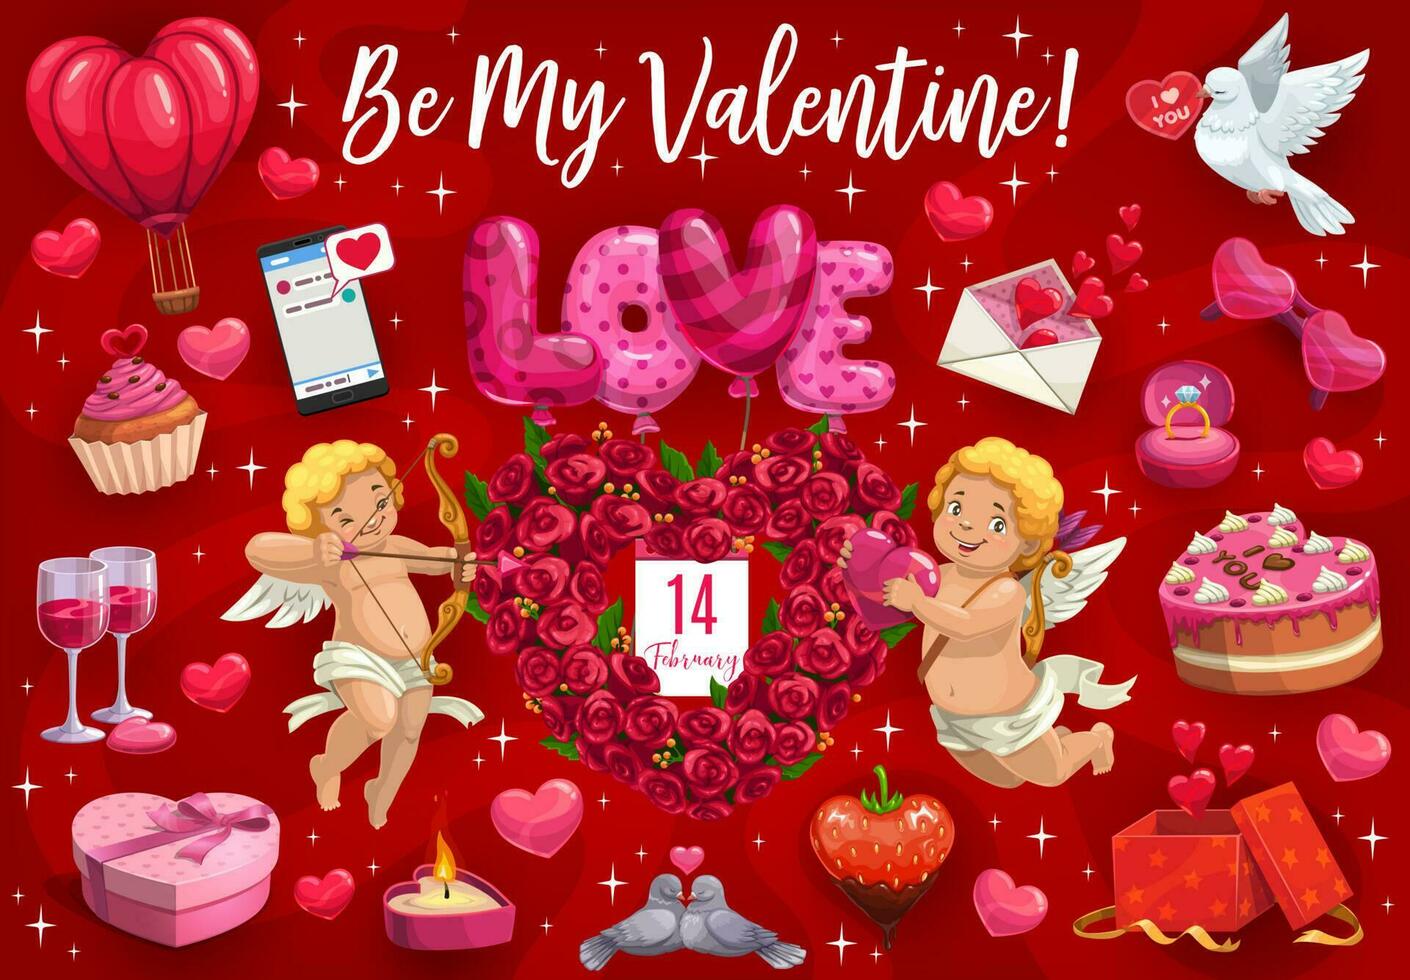 Be My Valentine, cupid angels and hearts vector